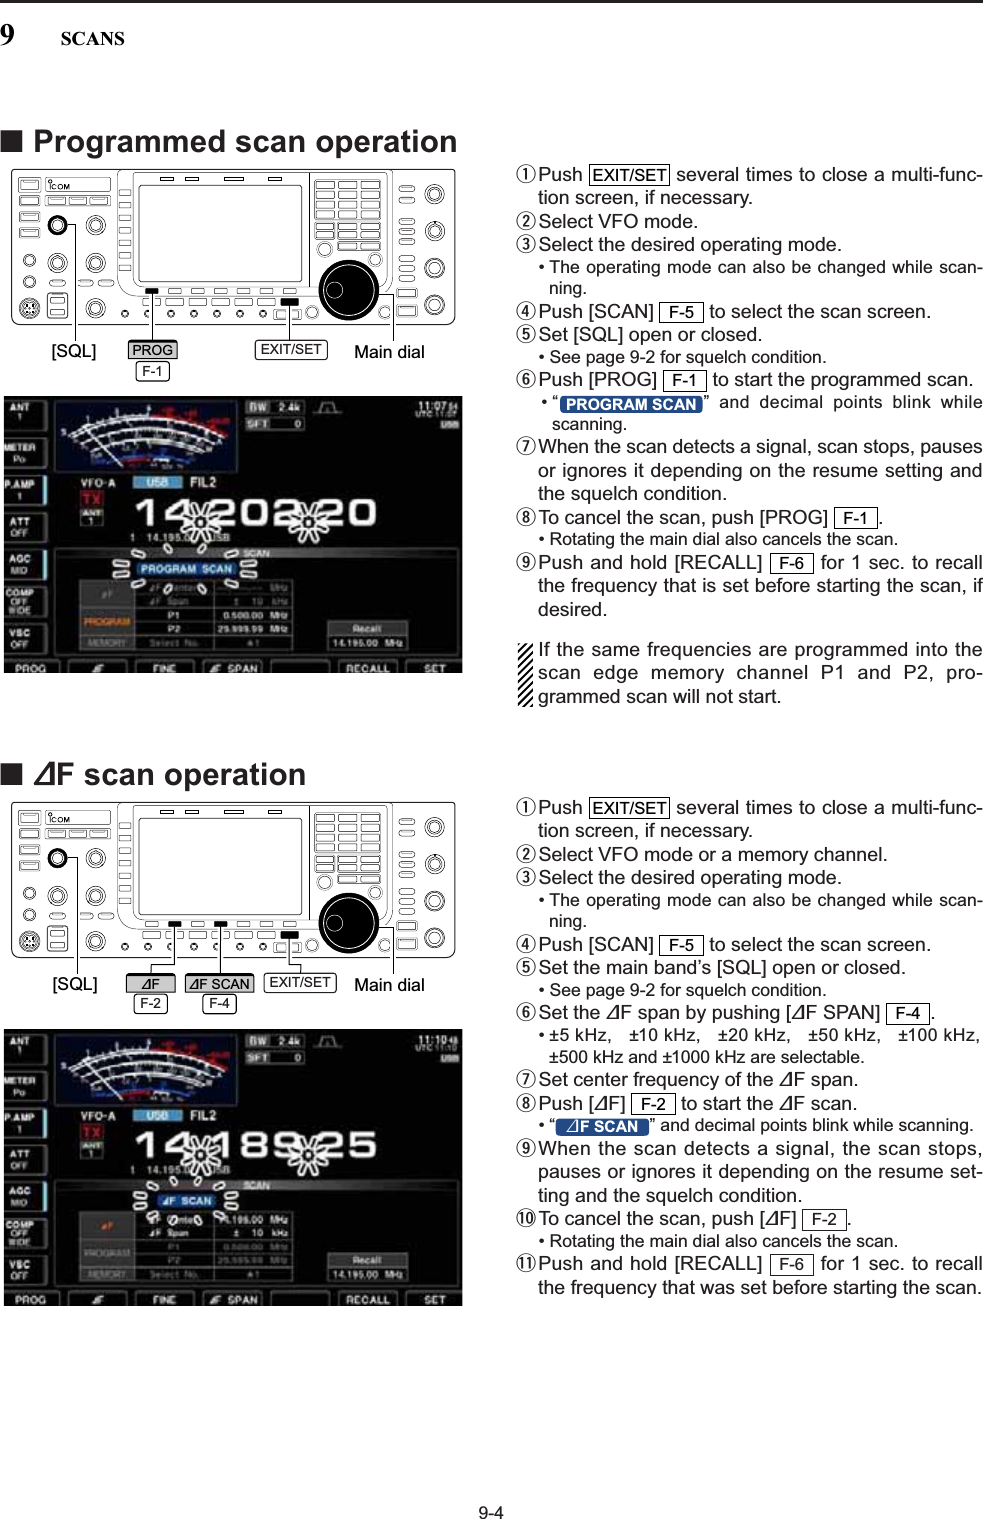 9-4■Programmed scan operationqPush  several times to close a multi-func-tion screen, if necessary.wSelect VFO mode.eSelect the desired operating mode.• The operating mode can also be changed while scan-ning.rPush [SCAN]  to select the scan screen.tSet [SQL] open or closed.• See page 9-2 for squelch condition.yPush [PROG]  to start the programmed scan.• “ ” and decimal points blink whilescanning.uWhen the scan detects a signal, scan stops, pausesor ignores it depending on the resume setting andthe squelch condition.iTo cancel the scan, push [PROG]  .• Rotating the main dial also cancels the scan.oPush and hold [RECALL]  for 1 sec. to recallthe frequency that is set before starting the scan, ifdesired.If the same frequencies are programmed into thescan edge memory channel P1 and P2, pro-grammed scan will not start.■∂F scan operationqPush  several times to close a multi-func-tion screen, if necessary.wSelect VFO mode or a memory channel.eSelect the desired operating mode.• The operating mode can also be changed while scan-ning.rPush [SCAN]  to select the scan screen.tSet the main band’s [SQL] open or closed.• See page 9-2 for squelch condition.ySet the ∂F span by pushing [∂F SPAN]  .• ±5 kHz, ±10 kHz, ±20 kHz, ±50 kHz, ±100 kHz,±500 kHz and ±1000 kHz are selectable.uSet center frequency of the ∂F span.iPush [∂F]  to start the ∂F scan.• “ ” and decimal points blink while scanning.oWhen the scan detects a signal, the scan stops,pauses or ignores it depending on the resume set-ting and the squelch condition.!0 To cancel the scan, push [∂F] .• Rotating the main dial also cancels the scan.!1 Push and hold [RECALL]  for 1 sec. to recallthe frequency that was set before starting the scan.F-6F-2:F SCANF-2F-4F-5EXIT/SETF-6F-1PROGRAM SCANF-1F-5EXIT/SET[SQL] Main dialEXIT/SETF-1PROG[SQL] Main dialF-2∂FF-4∂F SCAN EXIT/SET9SCANS